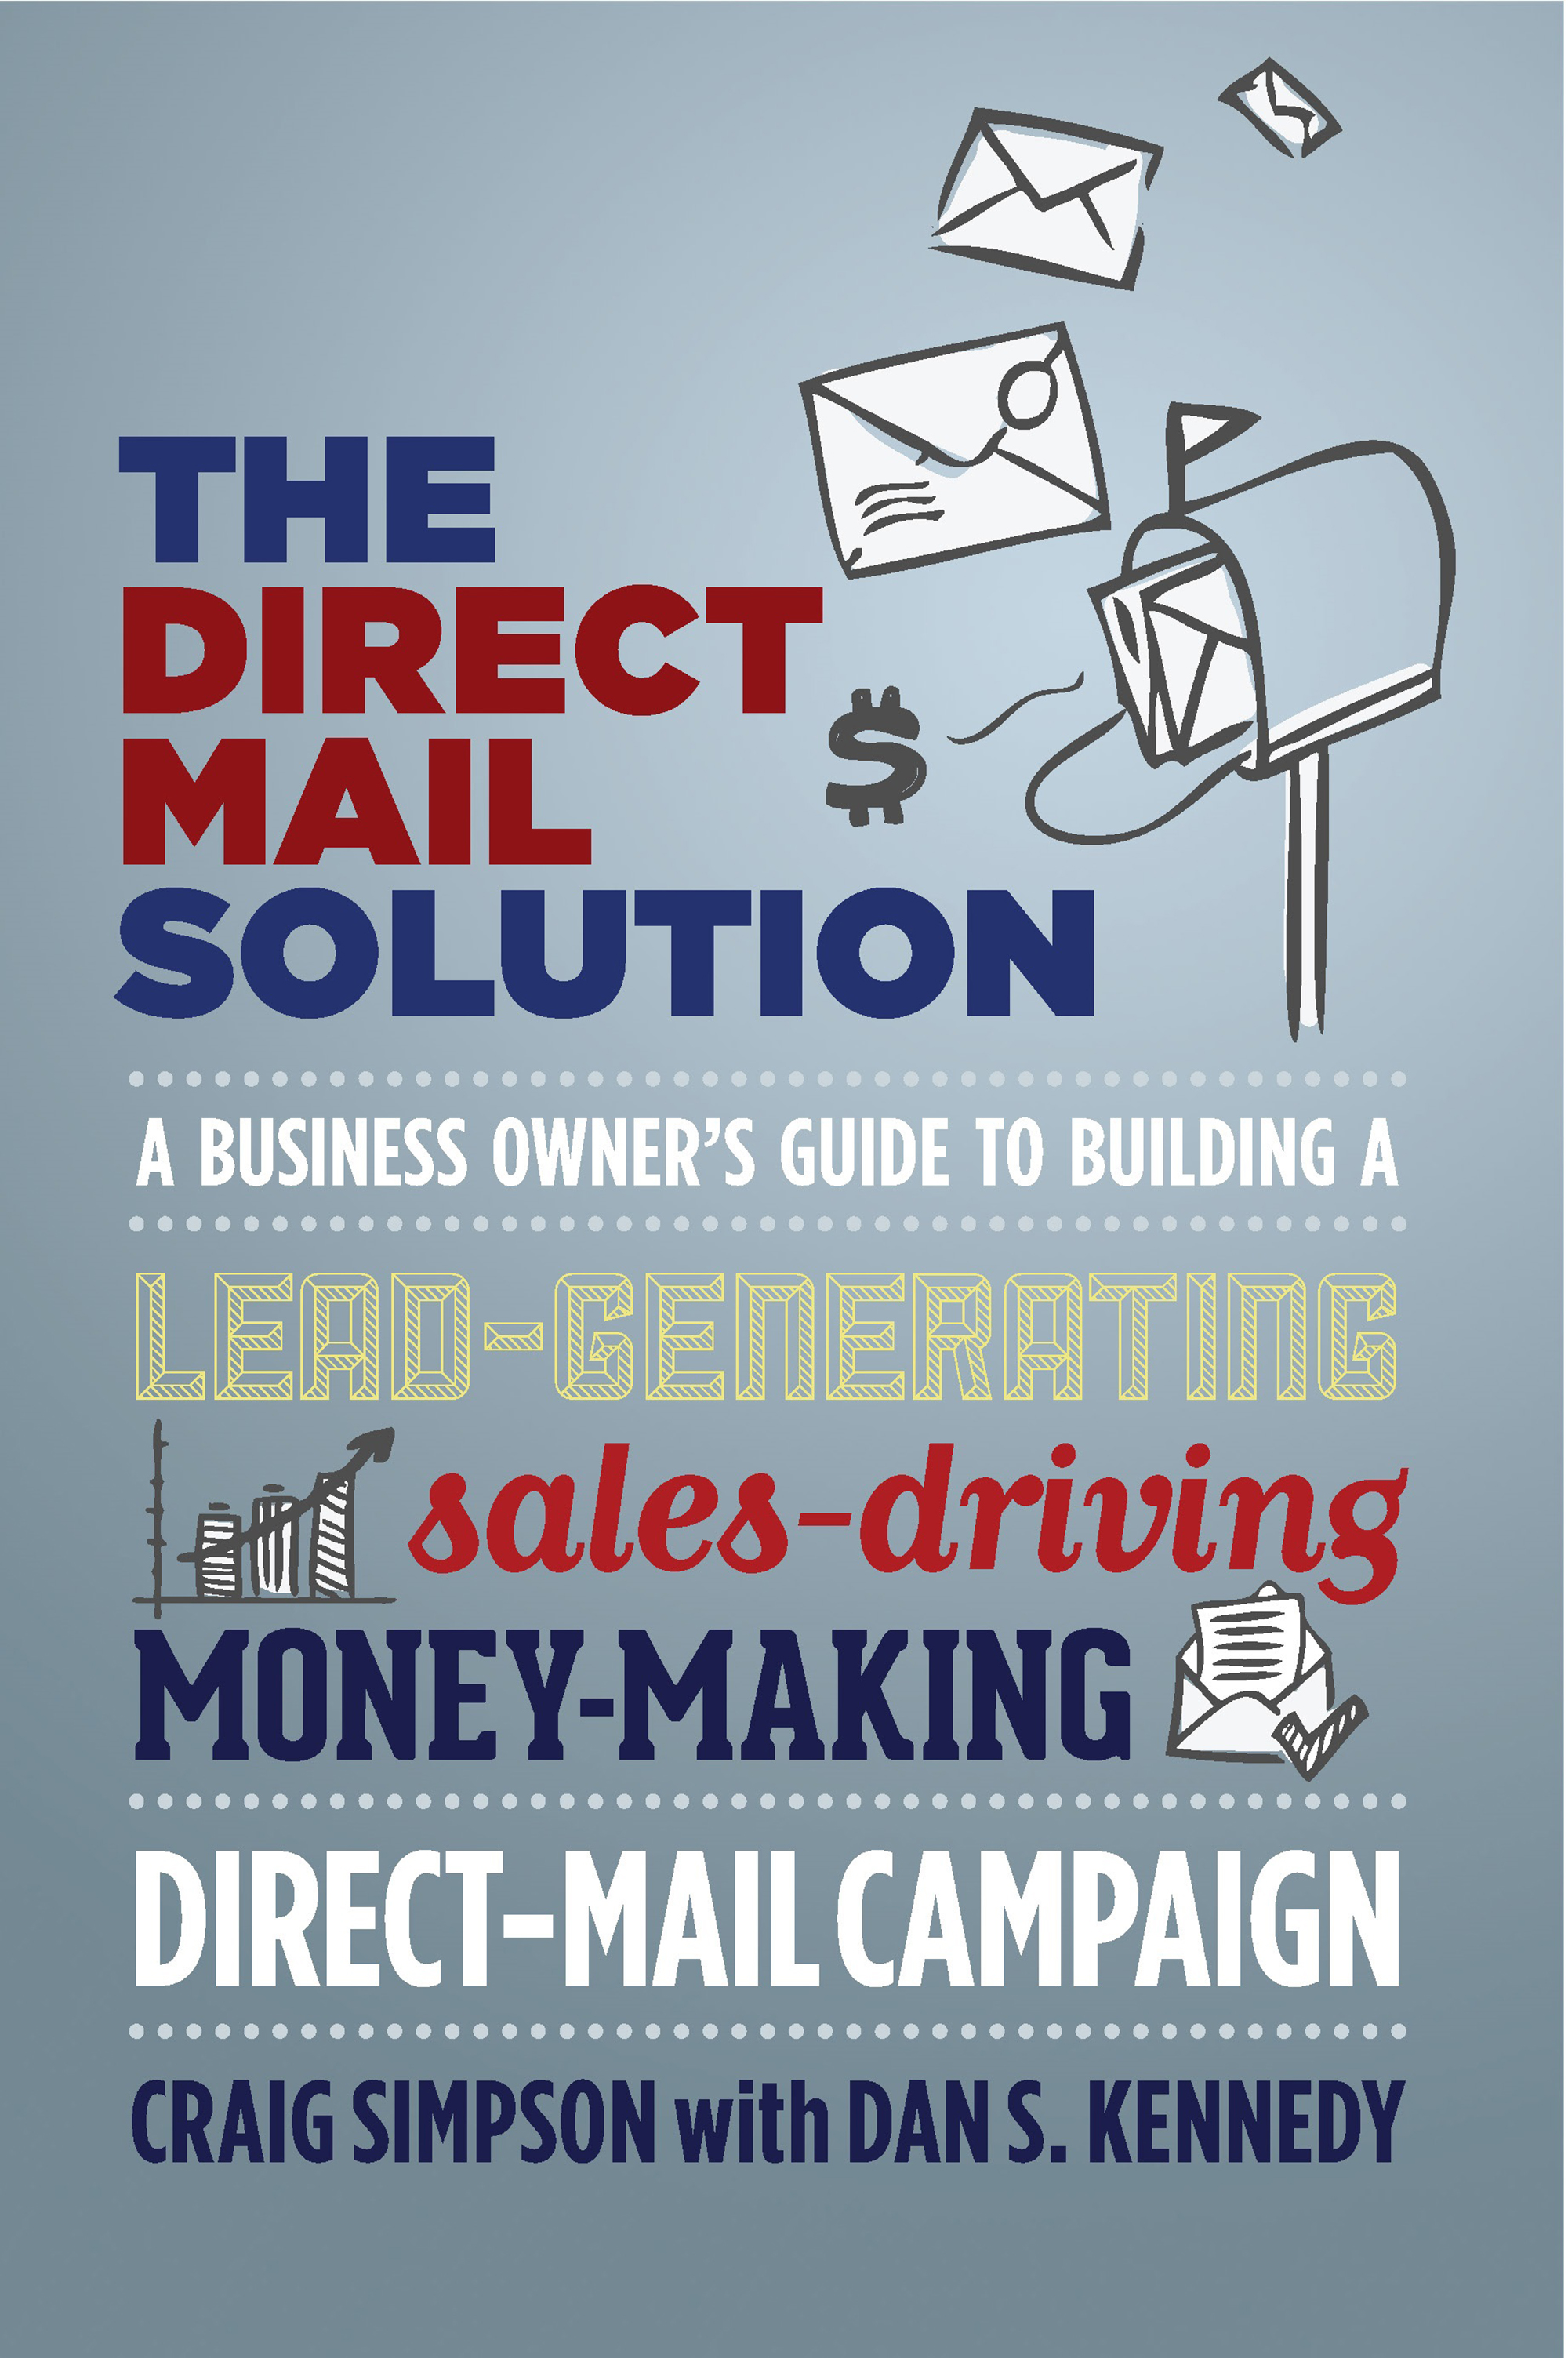 The Direct Mail Solution